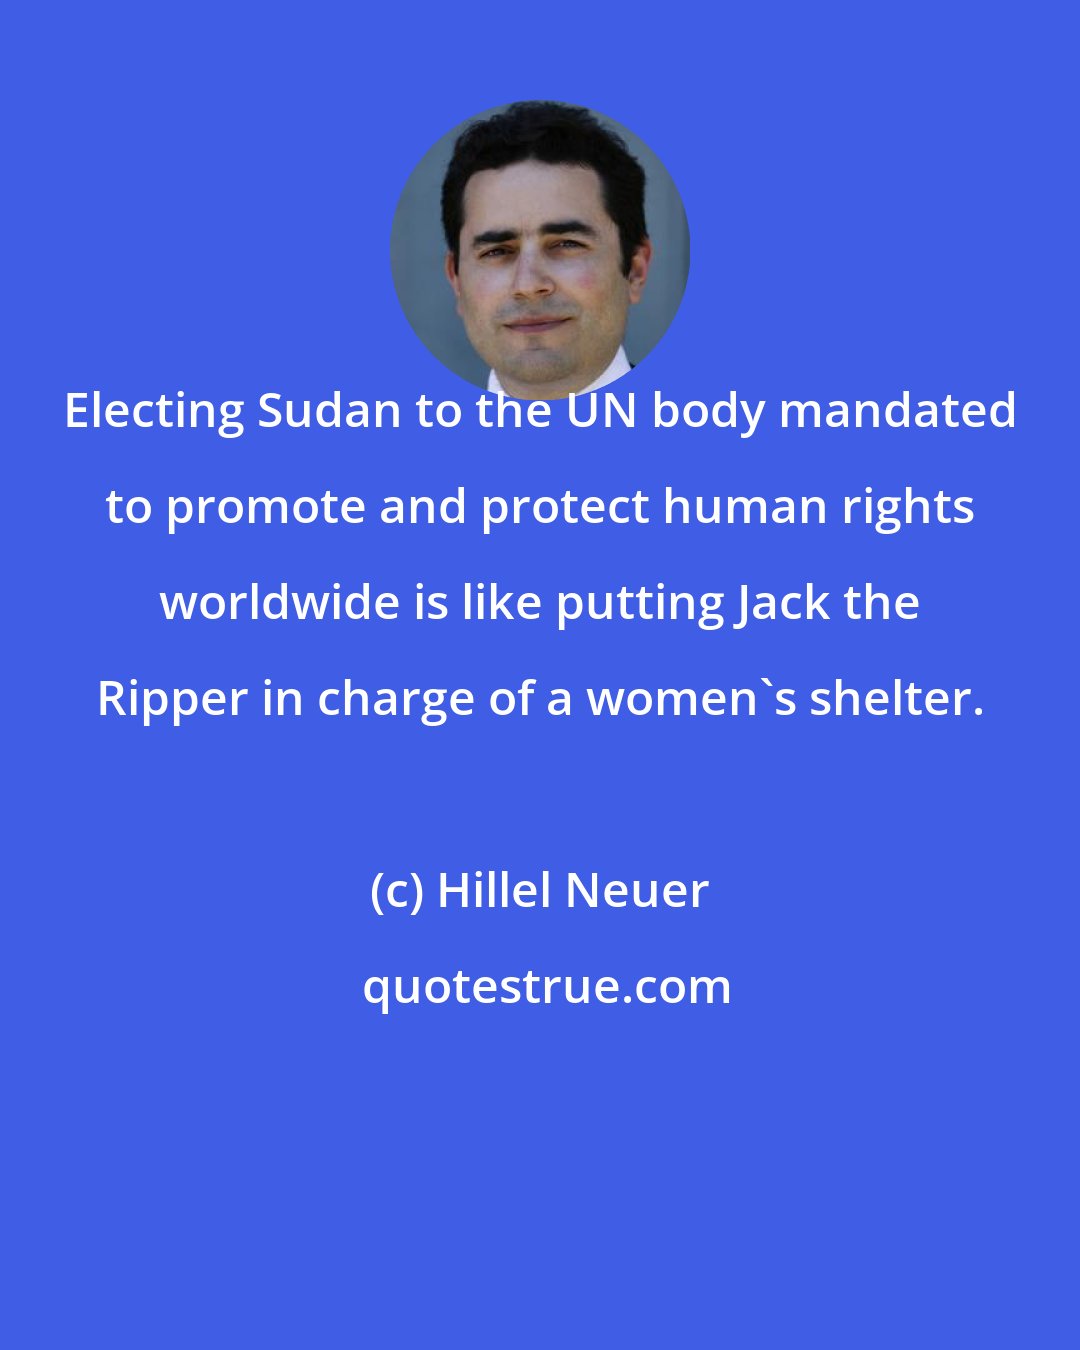 Hillel Neuer: Electing Sudan to the UN body mandated to promote and protect human rights worldwide is like putting Jack the Ripper in charge of a women's shelter.